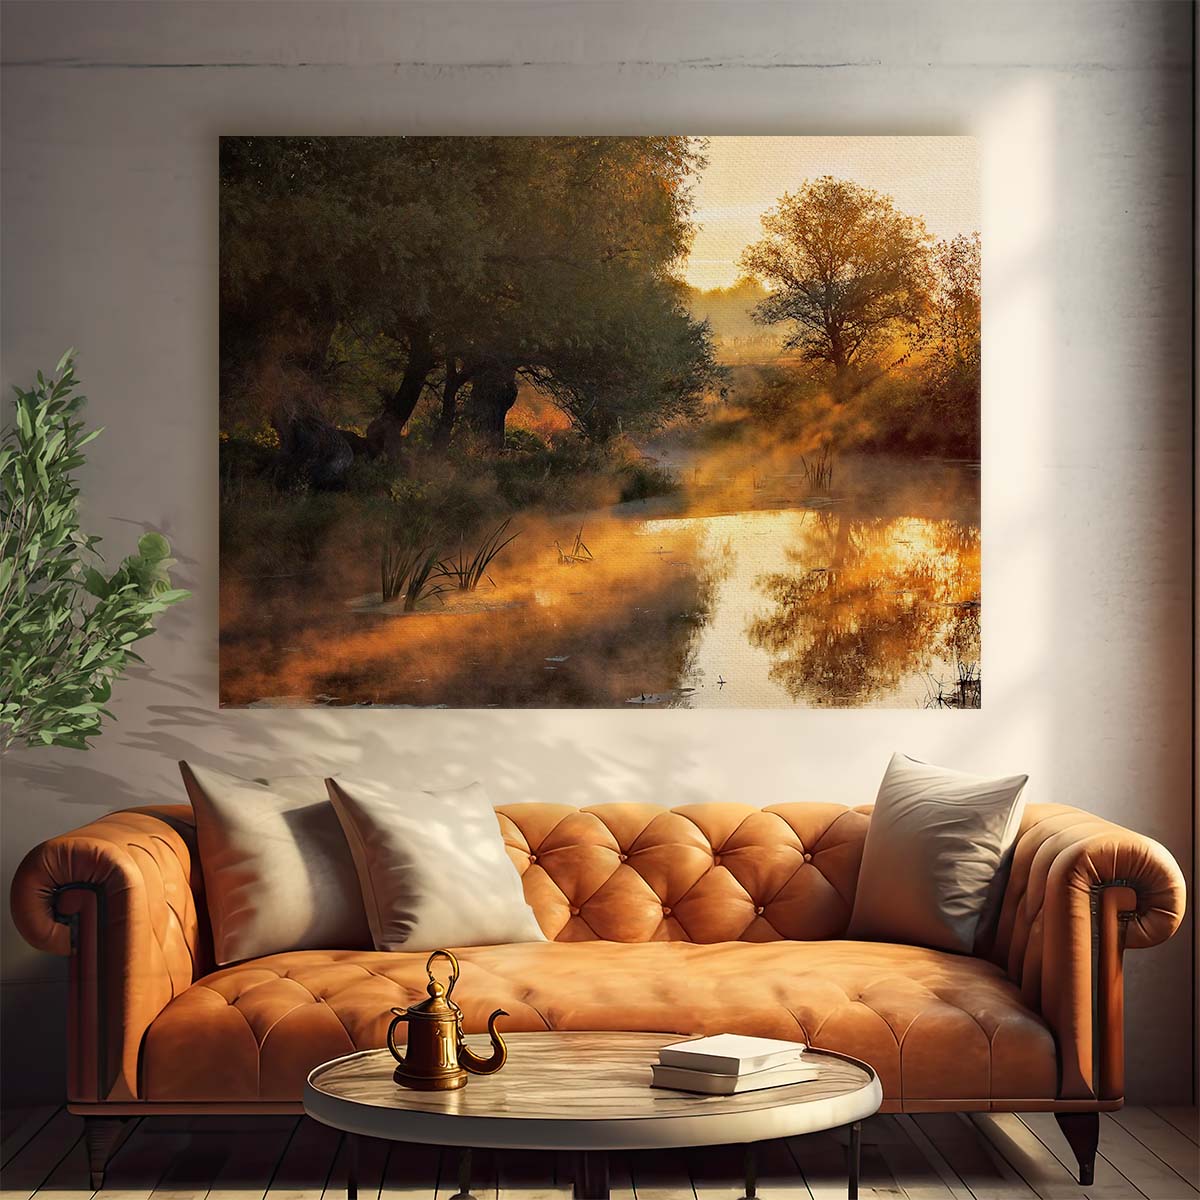 Autumnal Golden Forest Light Rays Wall Art by Luxuriance Designs. Made in USA.